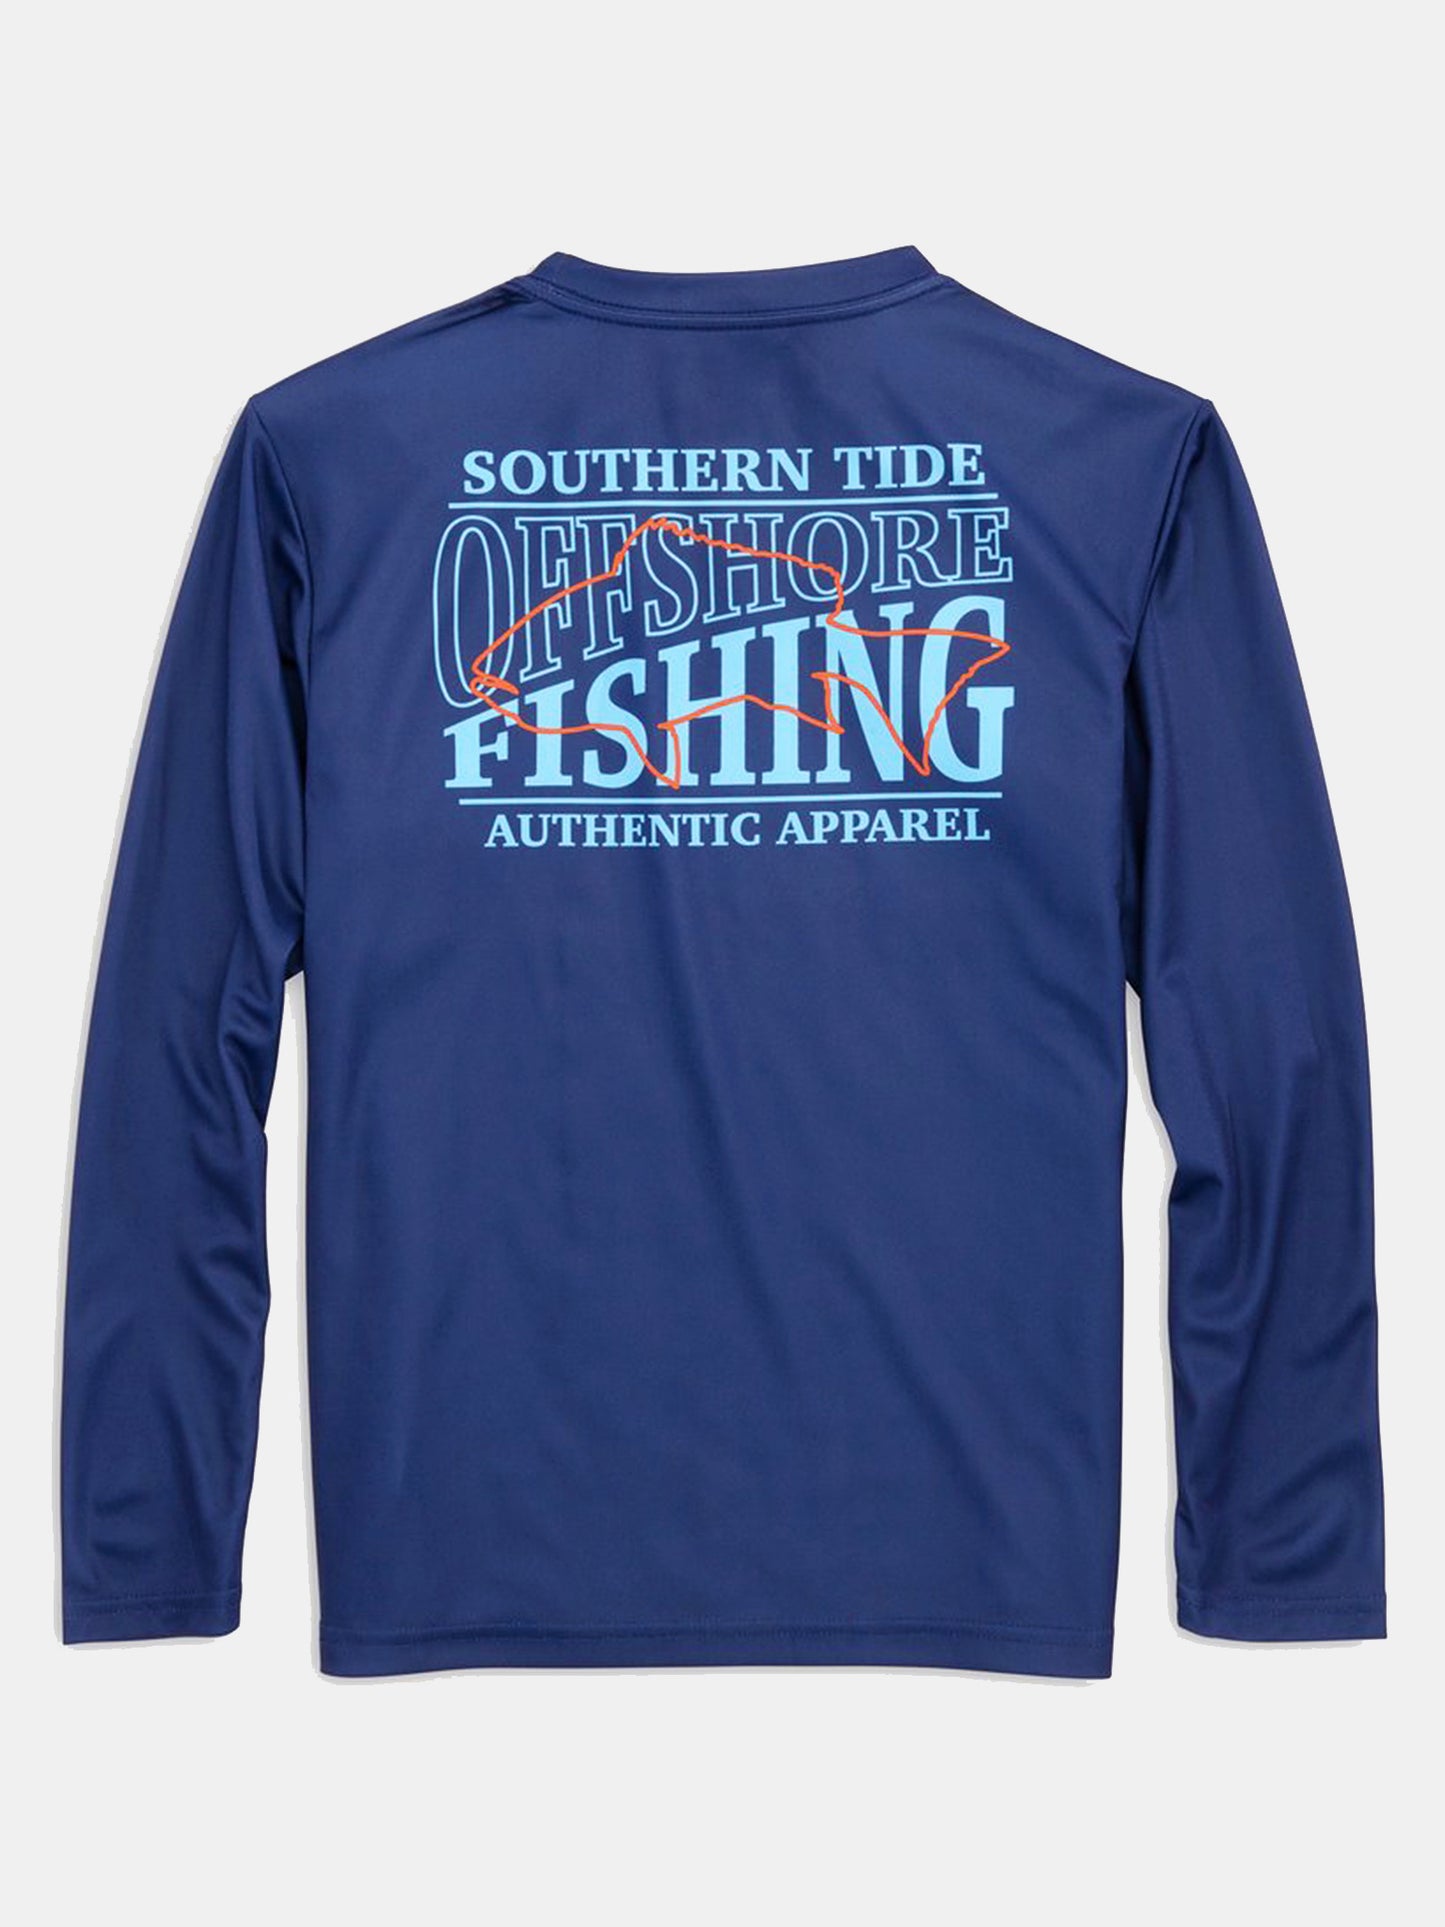 Southern Tide Boys' Offshore Fishing Performance Long-Sleeve T-Shirt